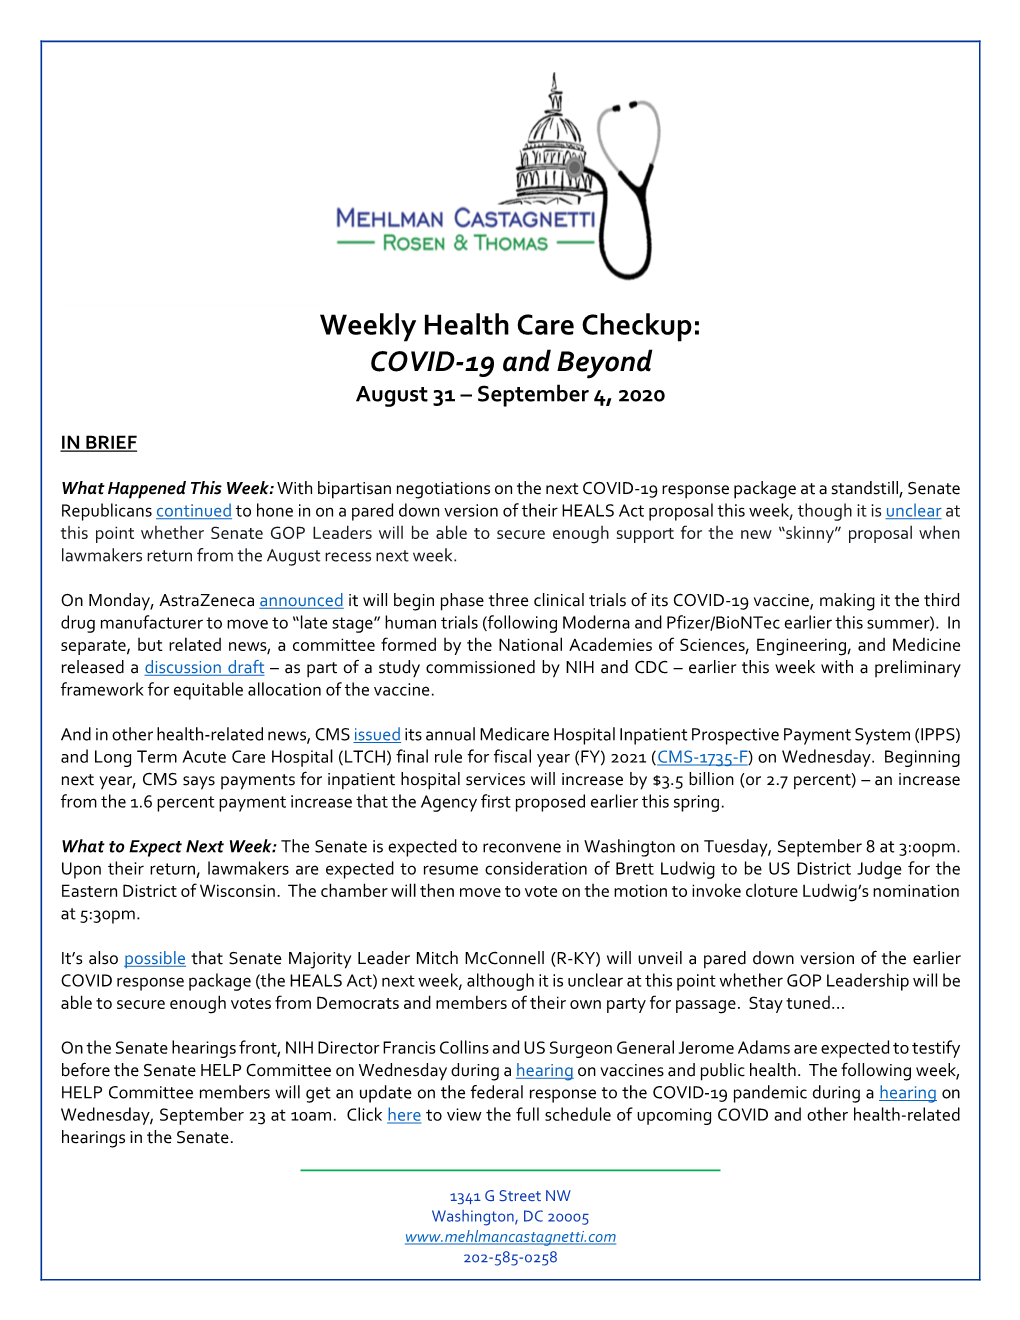 Weekly Health Care Update:COVID-19 and Beyondjune